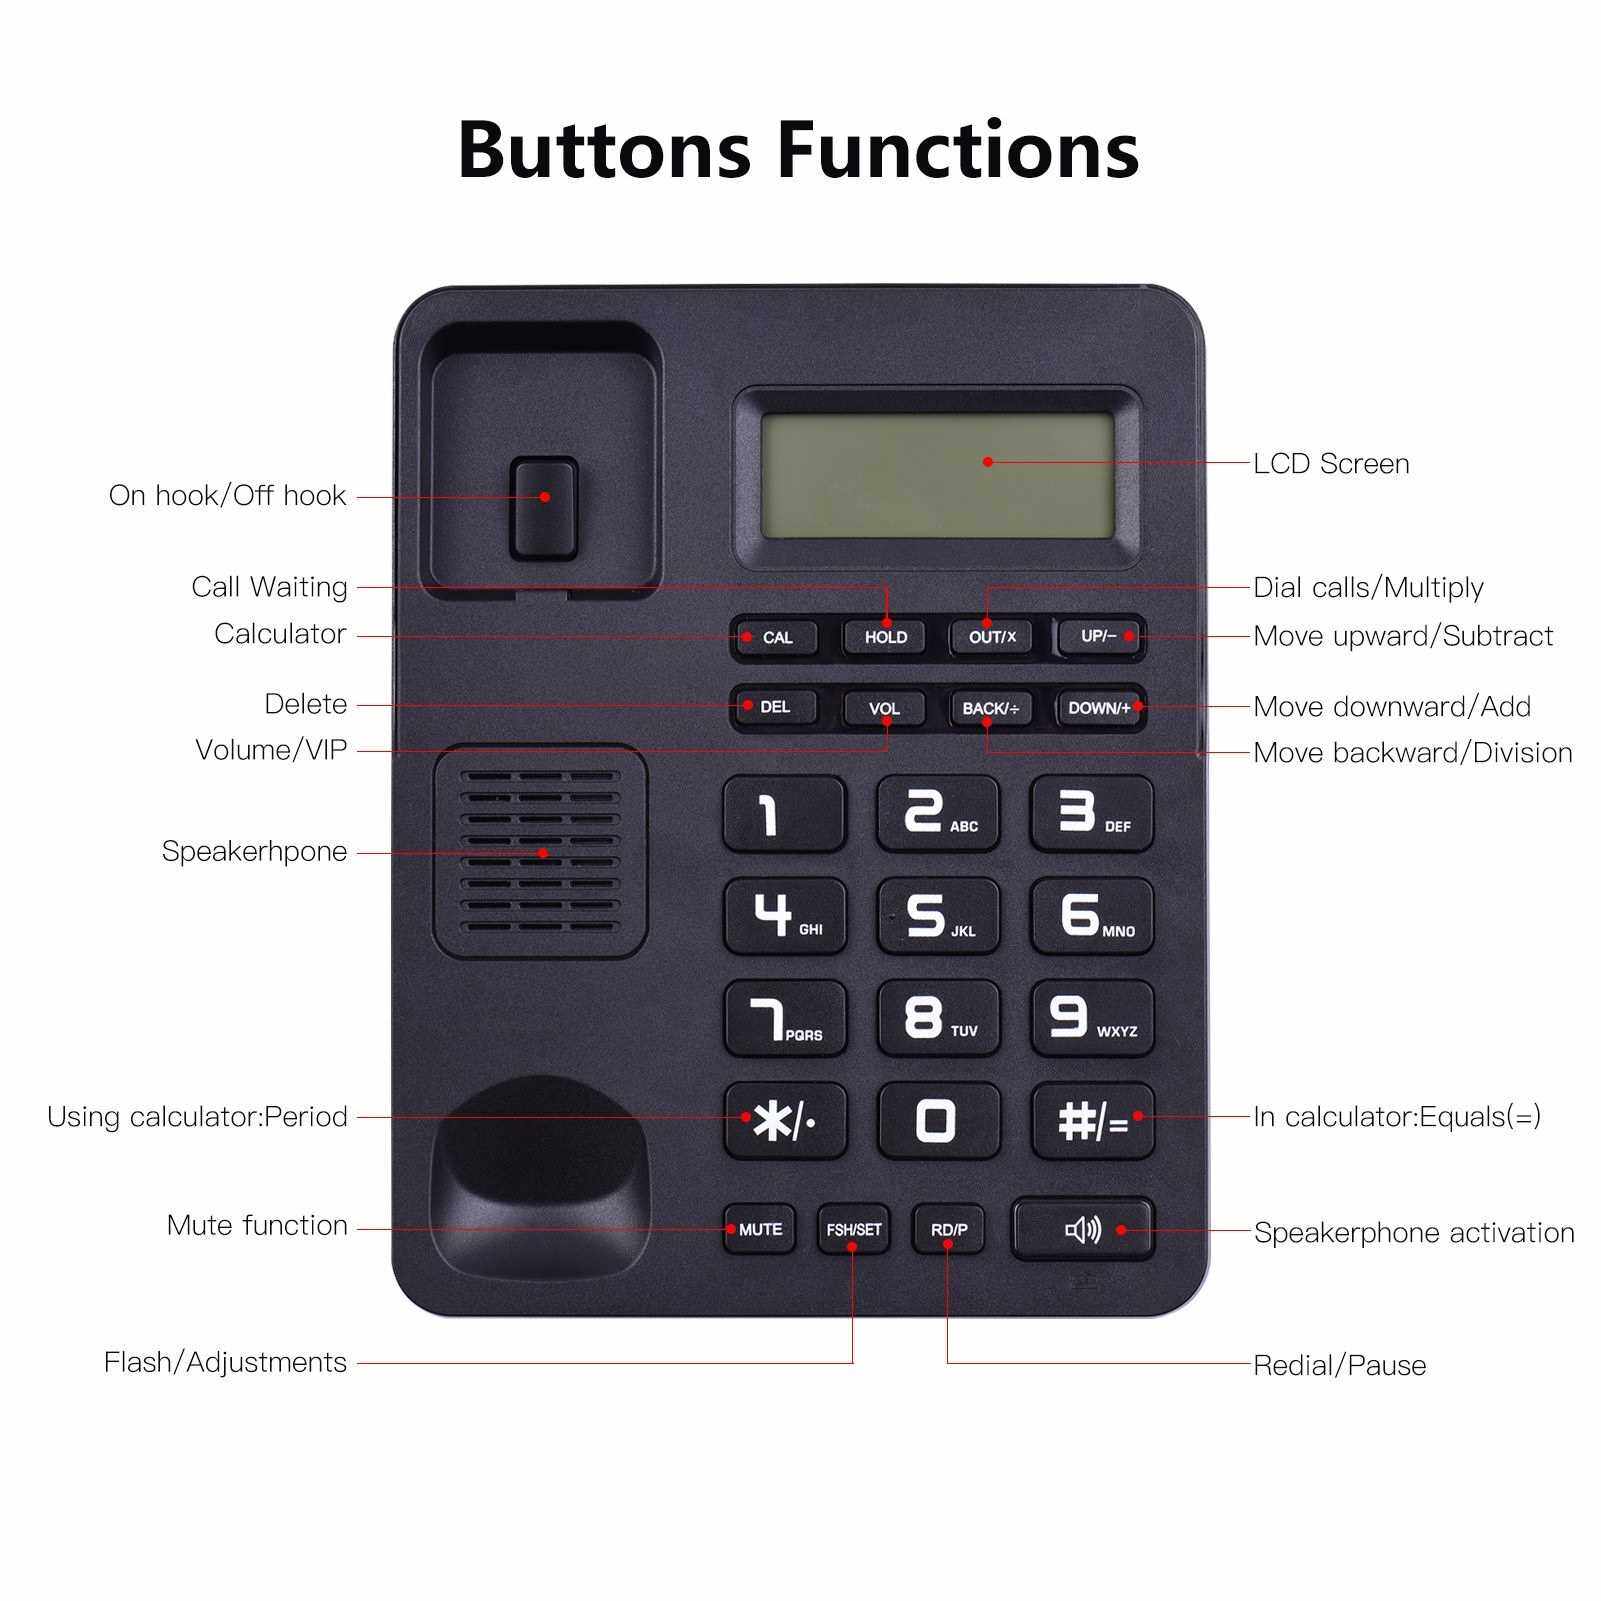 Black Corded Telephone Wired Desk Landline Phone with LCD Display Caller ID/Call Waiting Speakerphone Calculator Function Ringer Melodies Volume Adjustment for Hotel Office Business Home (Standard)